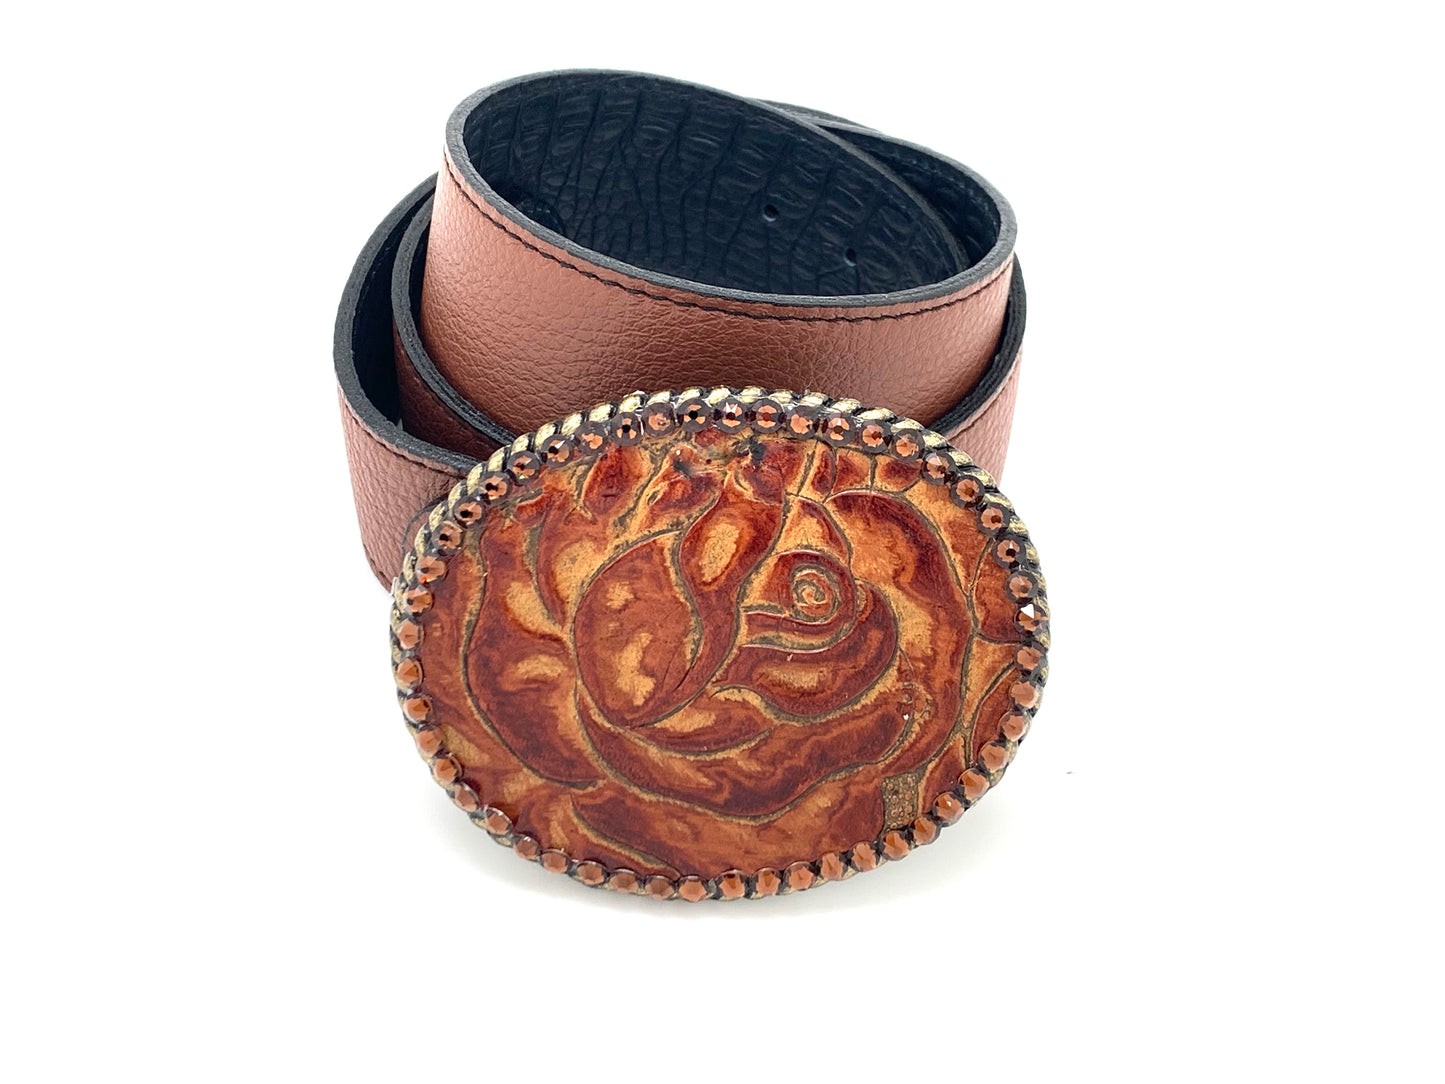 The Embossed Leather Flower